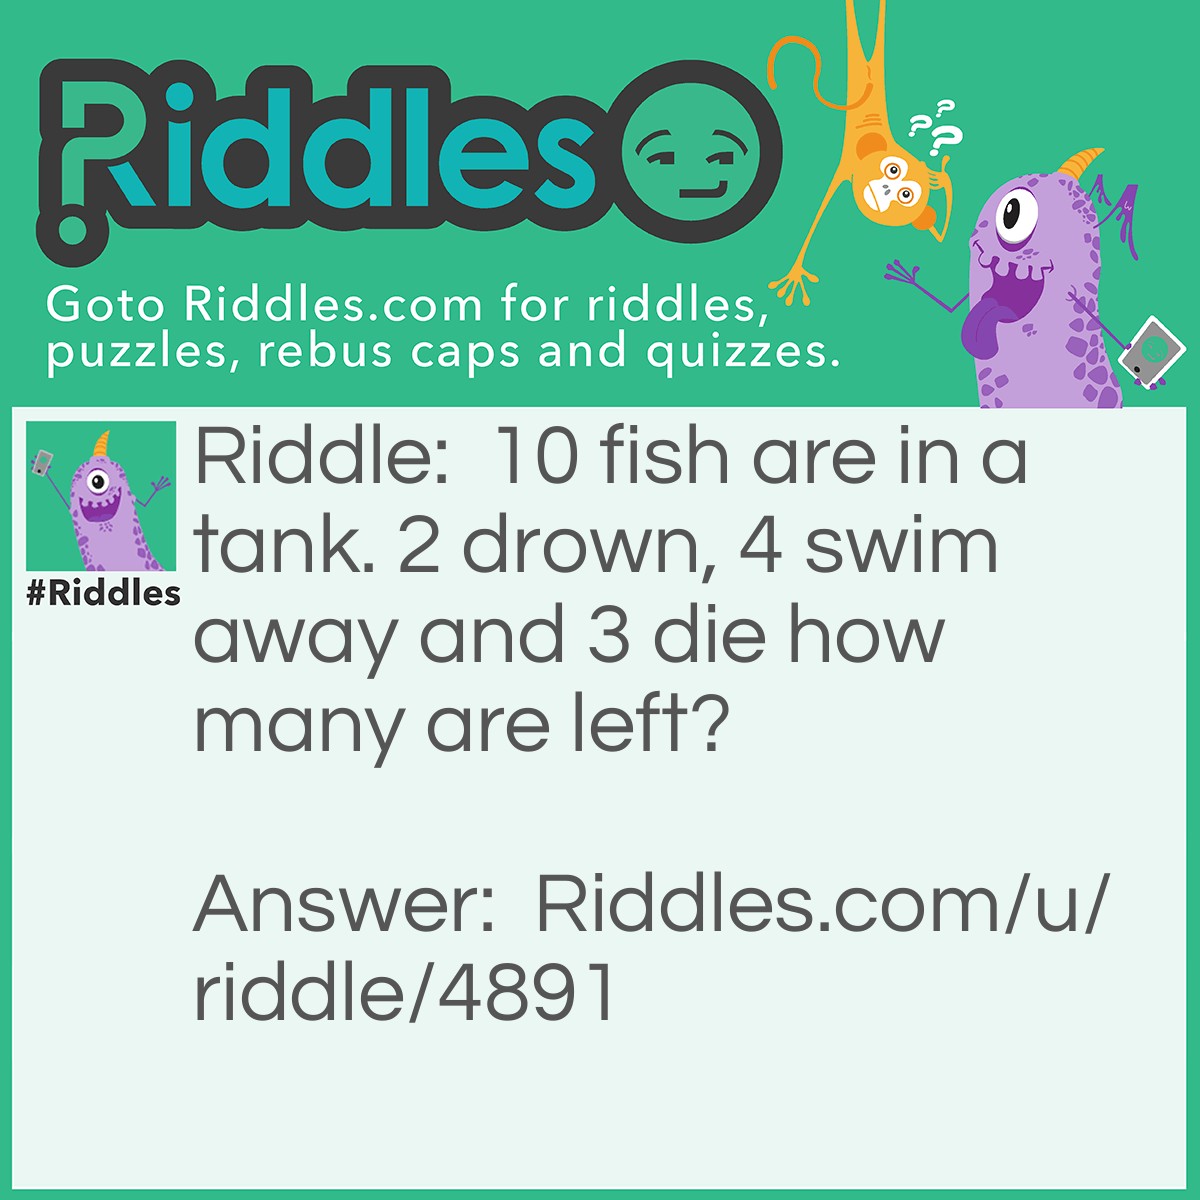 Riddle: 10 fish are in a tank. 2 drown, 4 swim away and 3 die how many are left? Answer: 10.